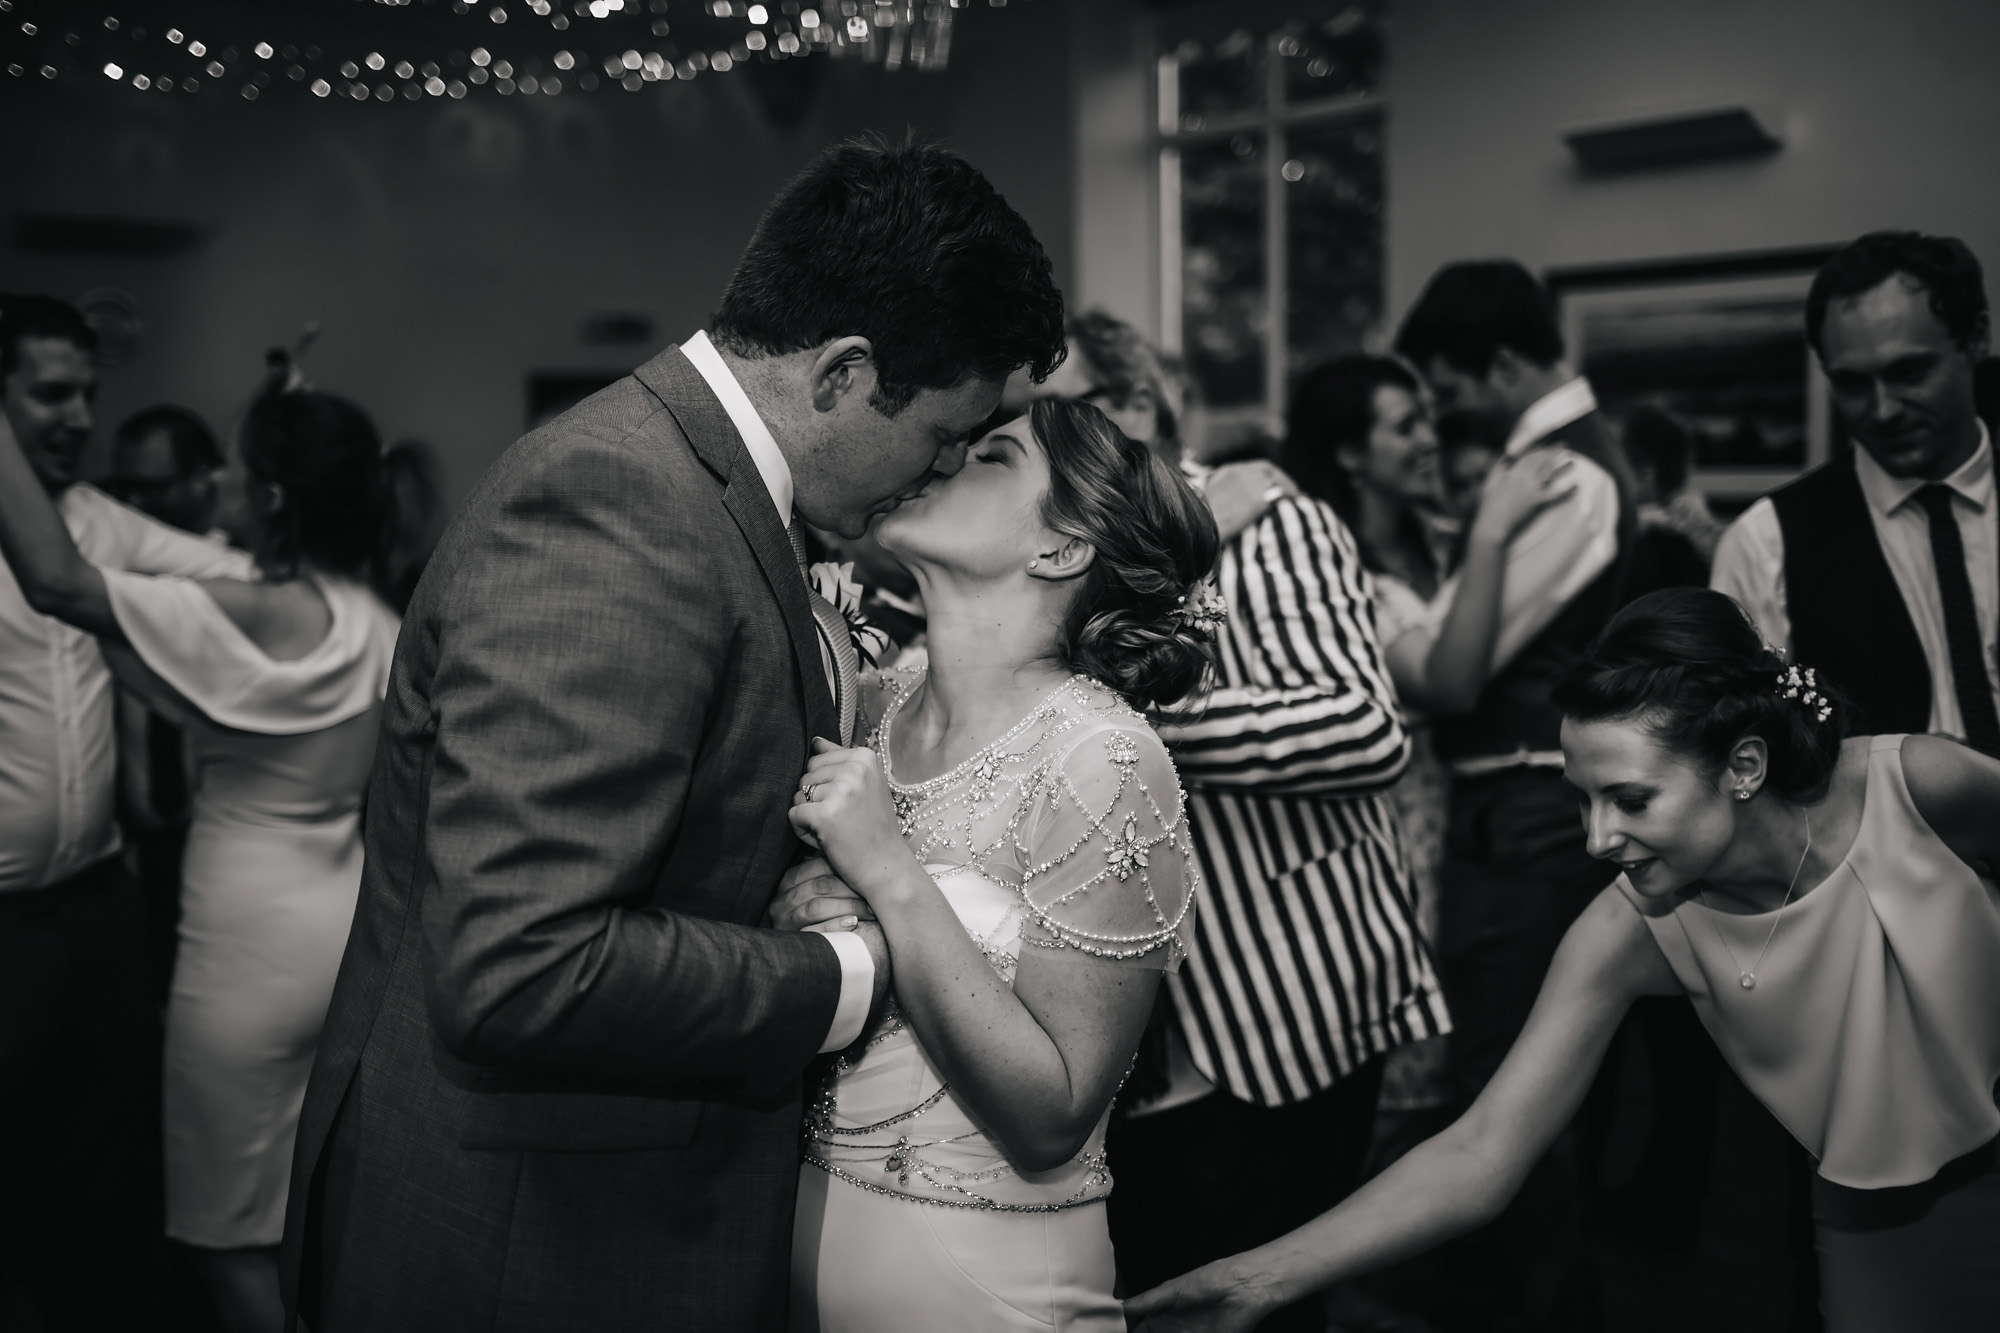 Bride and groom kiss during their first dance at their wedding